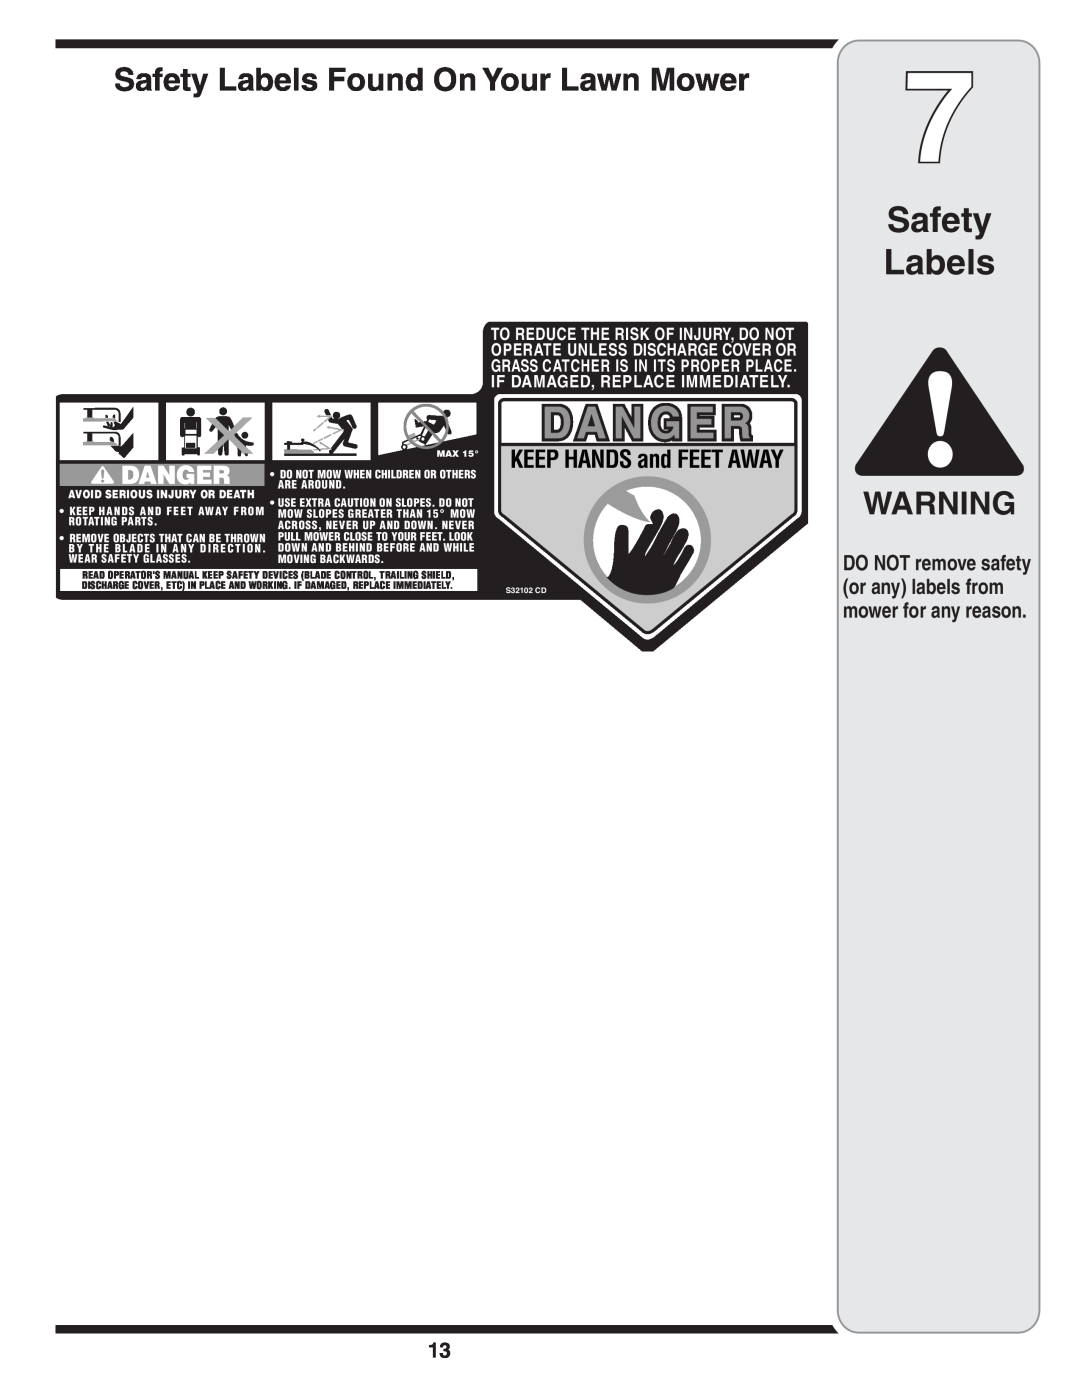 Troy-Bilt 420 warranty Safety Labels Found On Your Lawn Mower, KEEP HANDS and FEET AWAY, Are Around, Rotating Parts 